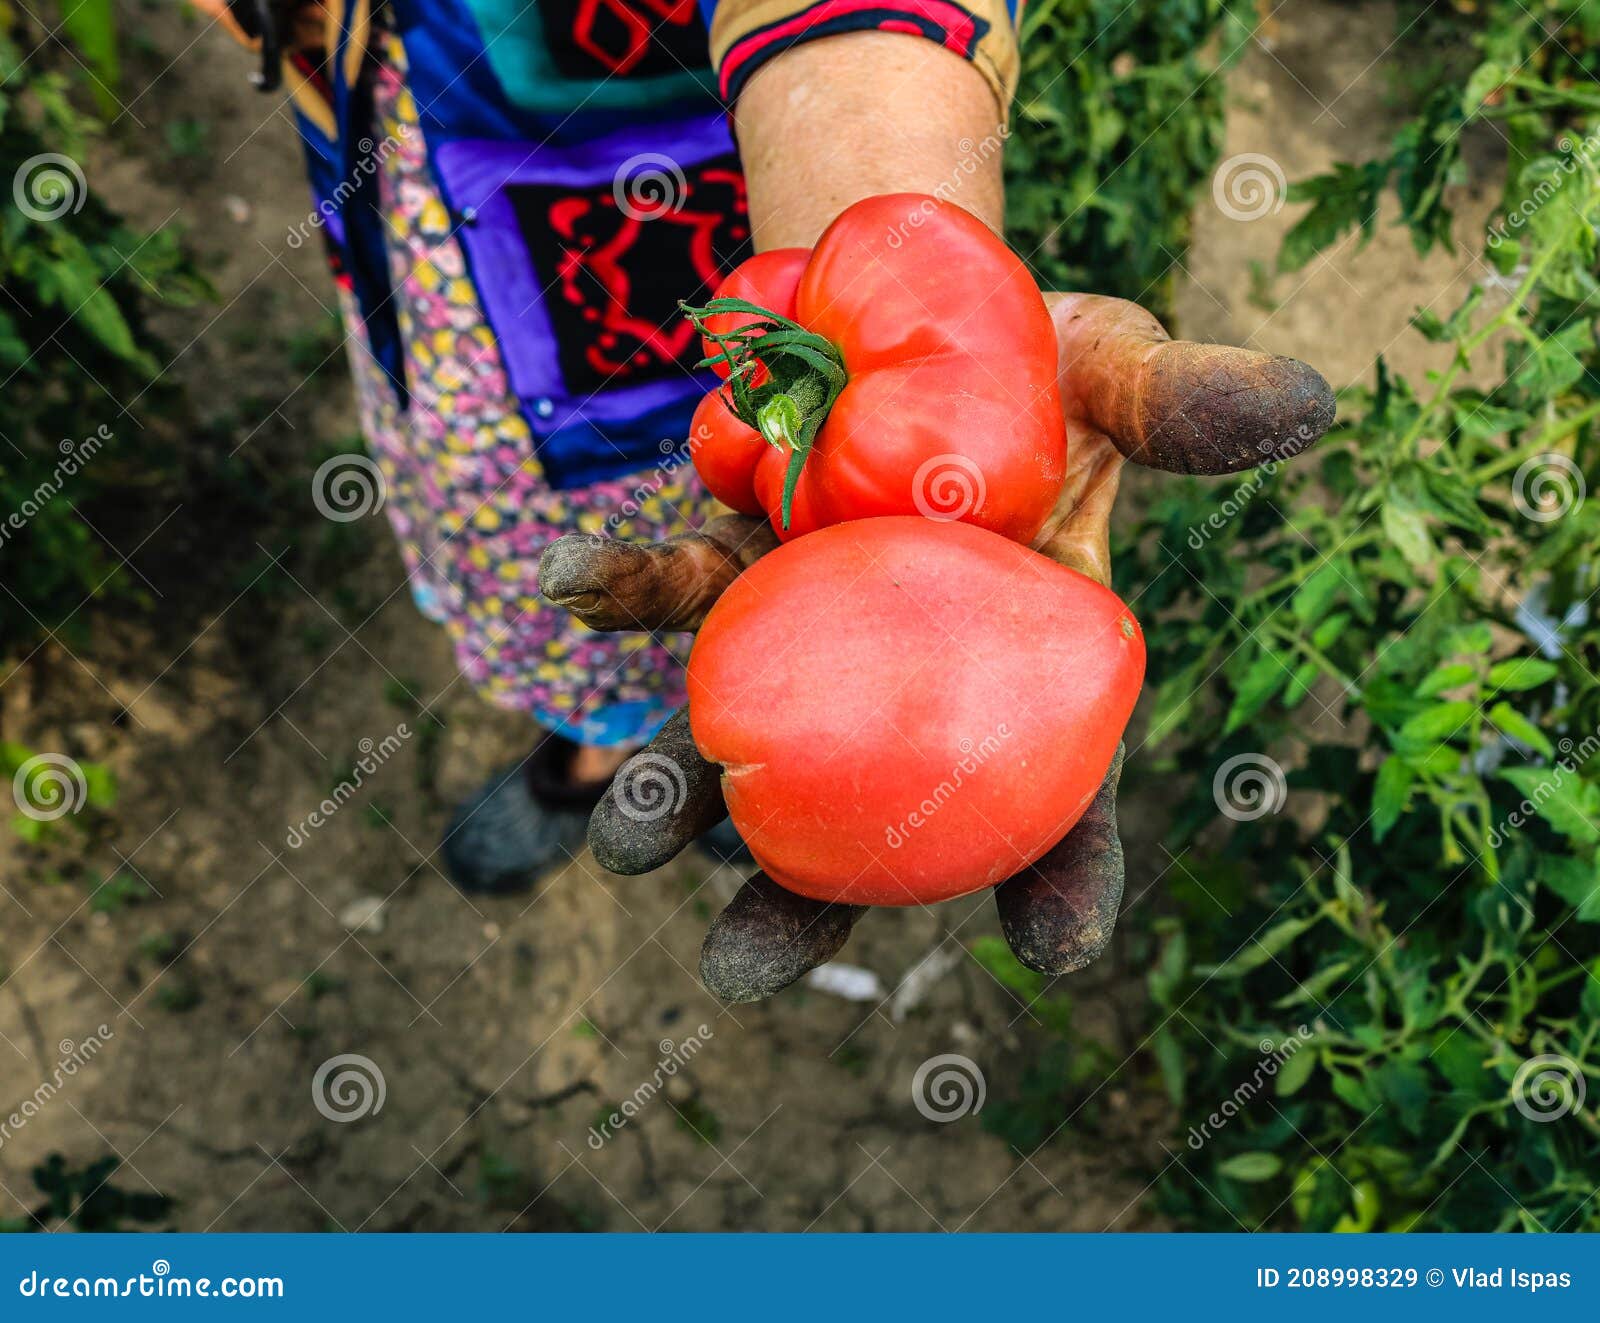 close up photo of an old woman`s hand holding two ripe tomatoes. dirty hard worked and wrinkled hand